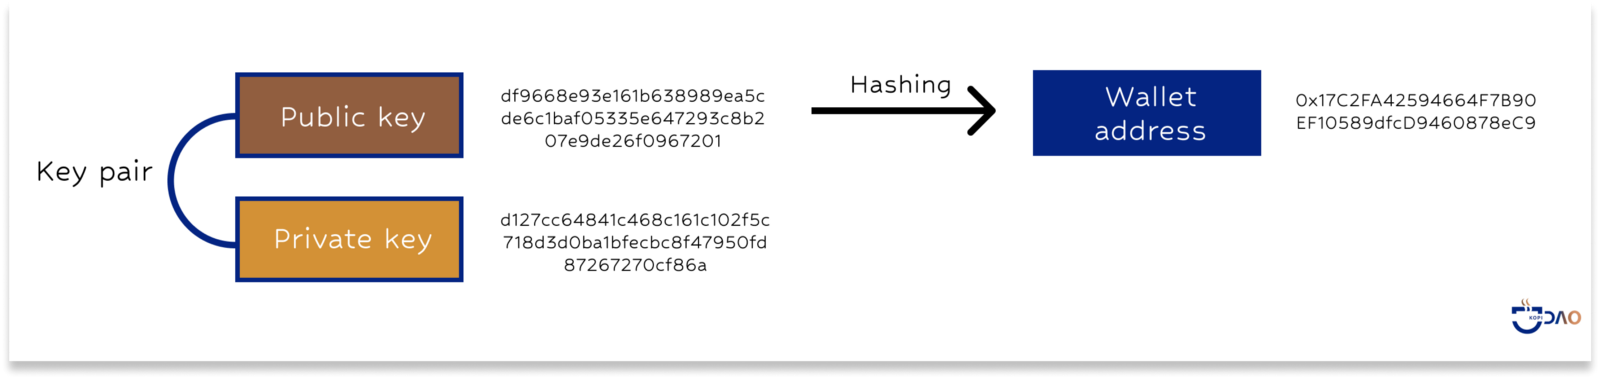 The wallet address is created out of the public key through cryptographic hashing. For most blockchain addresses, a hexadecimal hash algorithm is applied.